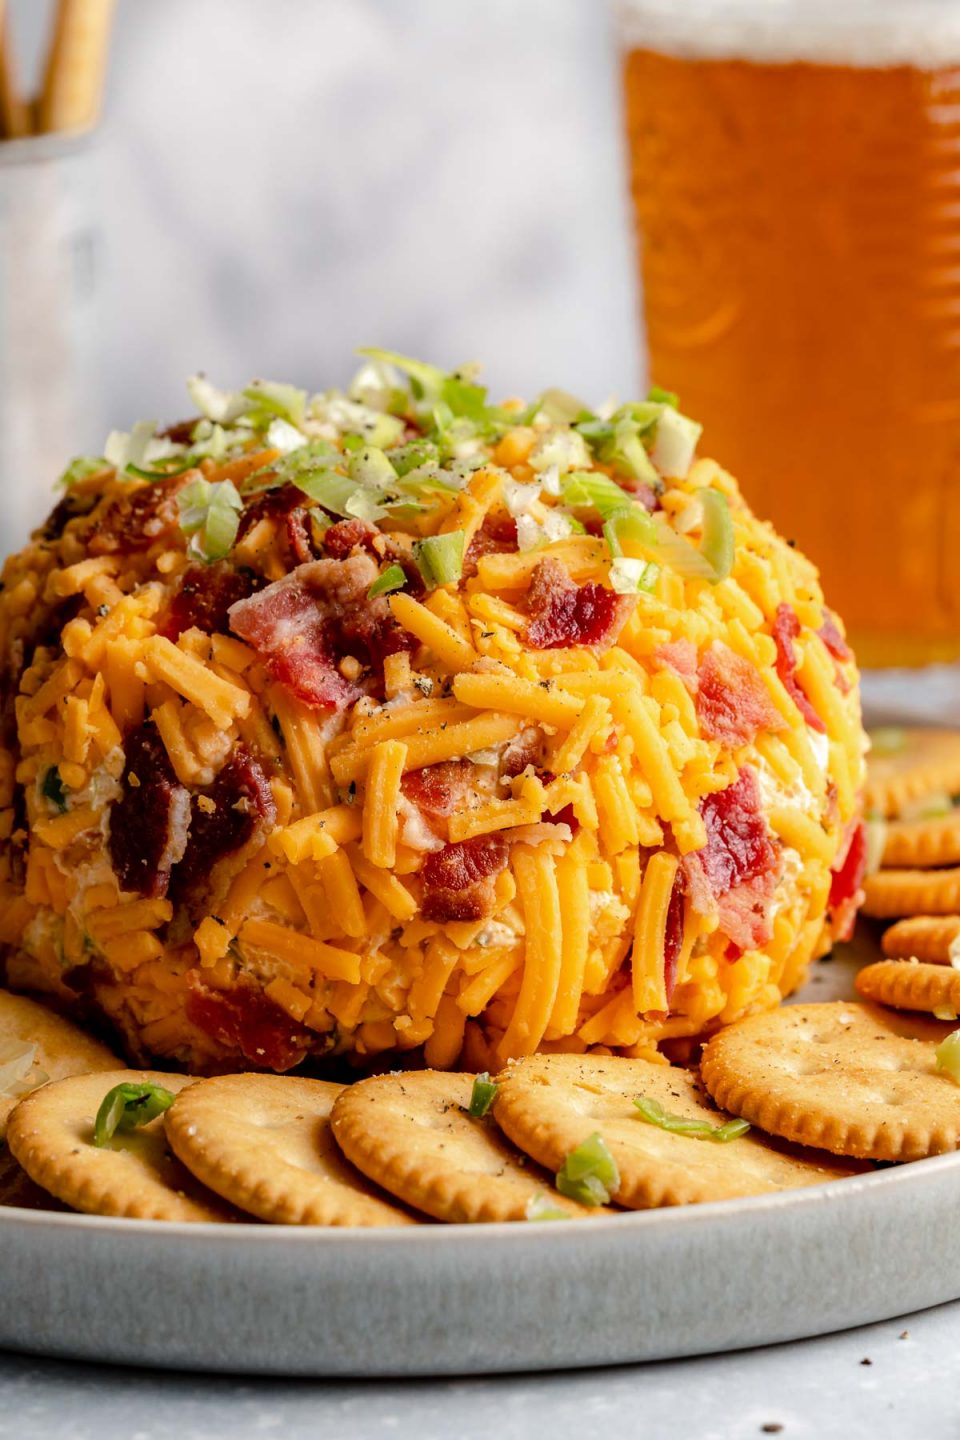 A side angle shot of a Bacon Cheddar Cheese ball sits atop a gray ceramic platter surrounded by a ring of Ritz crackers. The platter rests atop a gray-blue textured surface. A pint of beer and a silver container filled with breadstick crackers sits in the background out of focus.